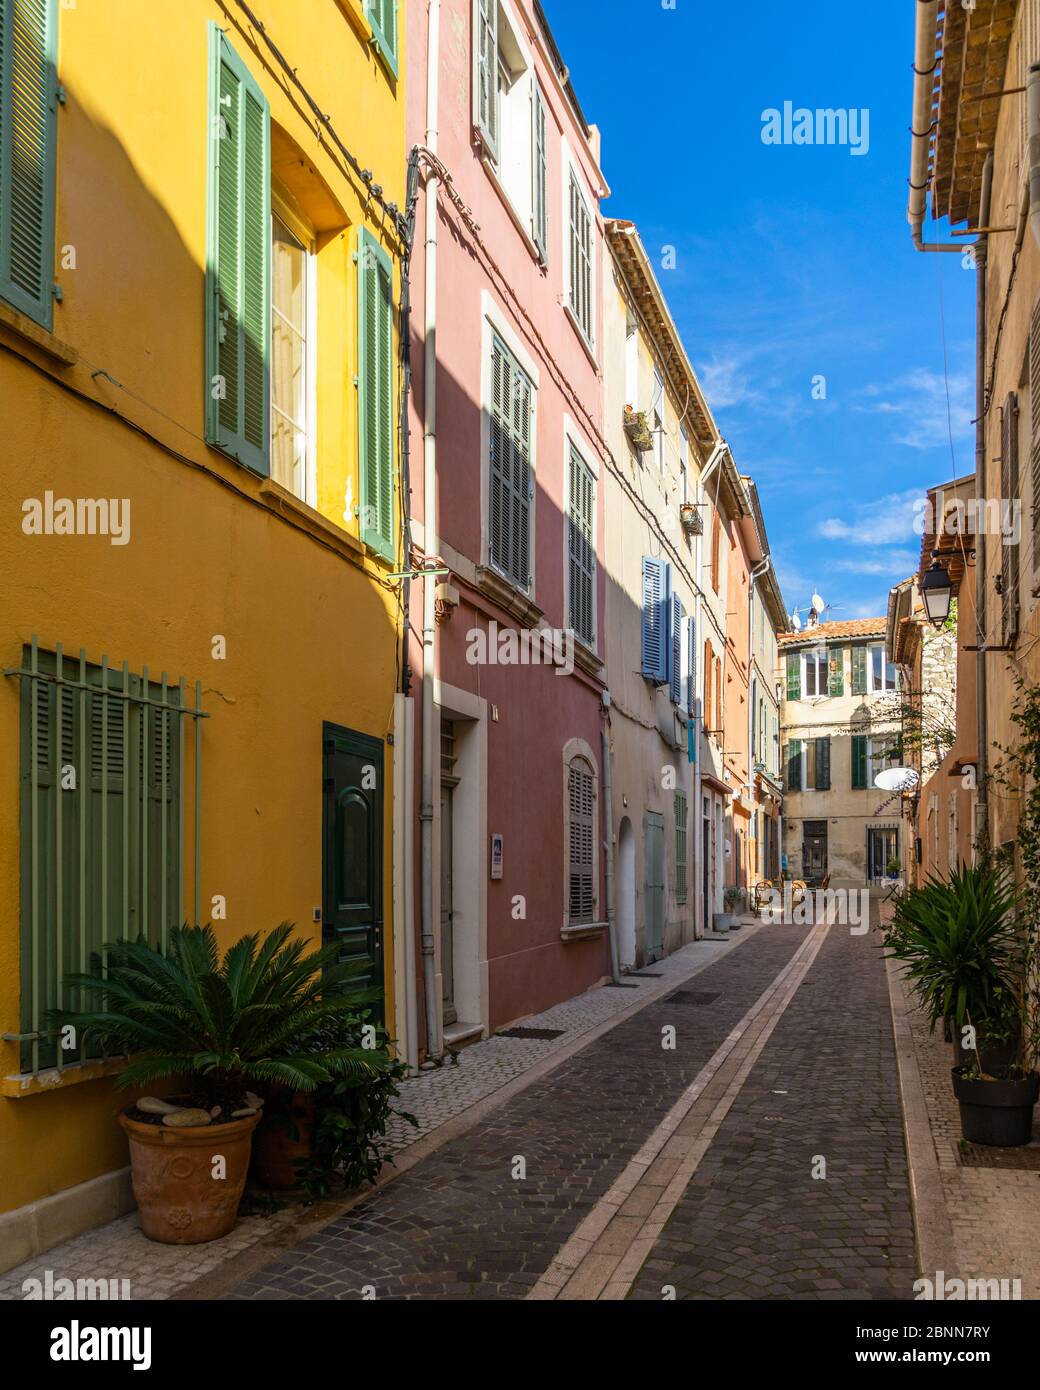 A pedestrian alleyway with colorful houses in the picturesque resort town of Cassis in  Southern France Stock Photo